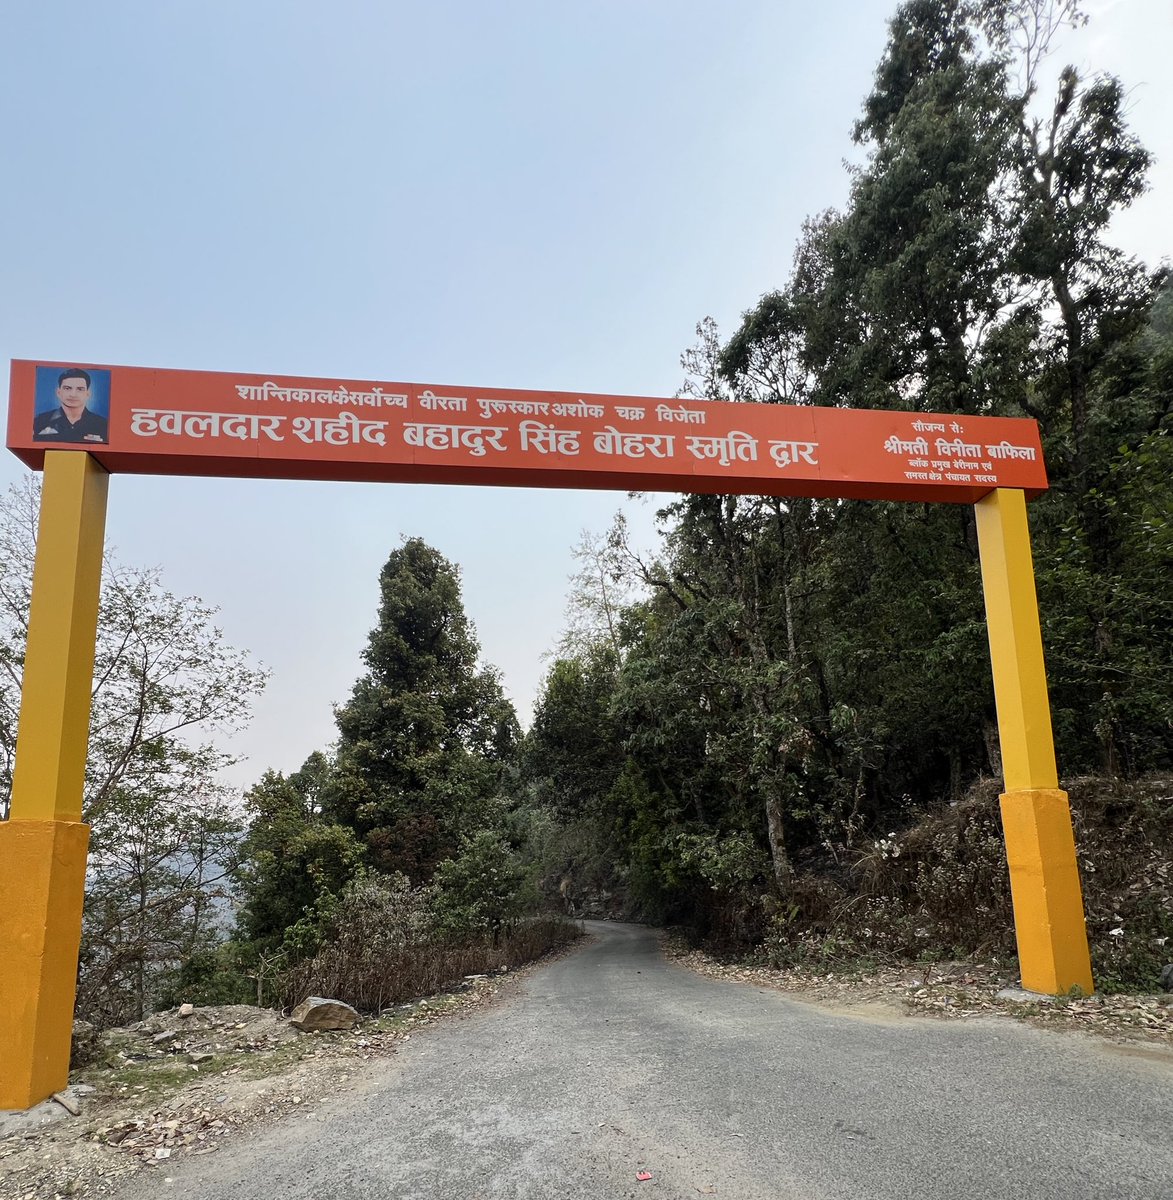 When traveling in Devbhoomi #Uttarakhand and you see this, Then stop, Salute the Soldier who protected us & then travel ahead. Homage to a Hero of #IndianArmy , HAVILDAR BAHADUR SINGH BOHRA ASHOK CHAKRA (P) 10 PARA 🦂 ' If Bravery Had a Face ' #KnowYourHeroes